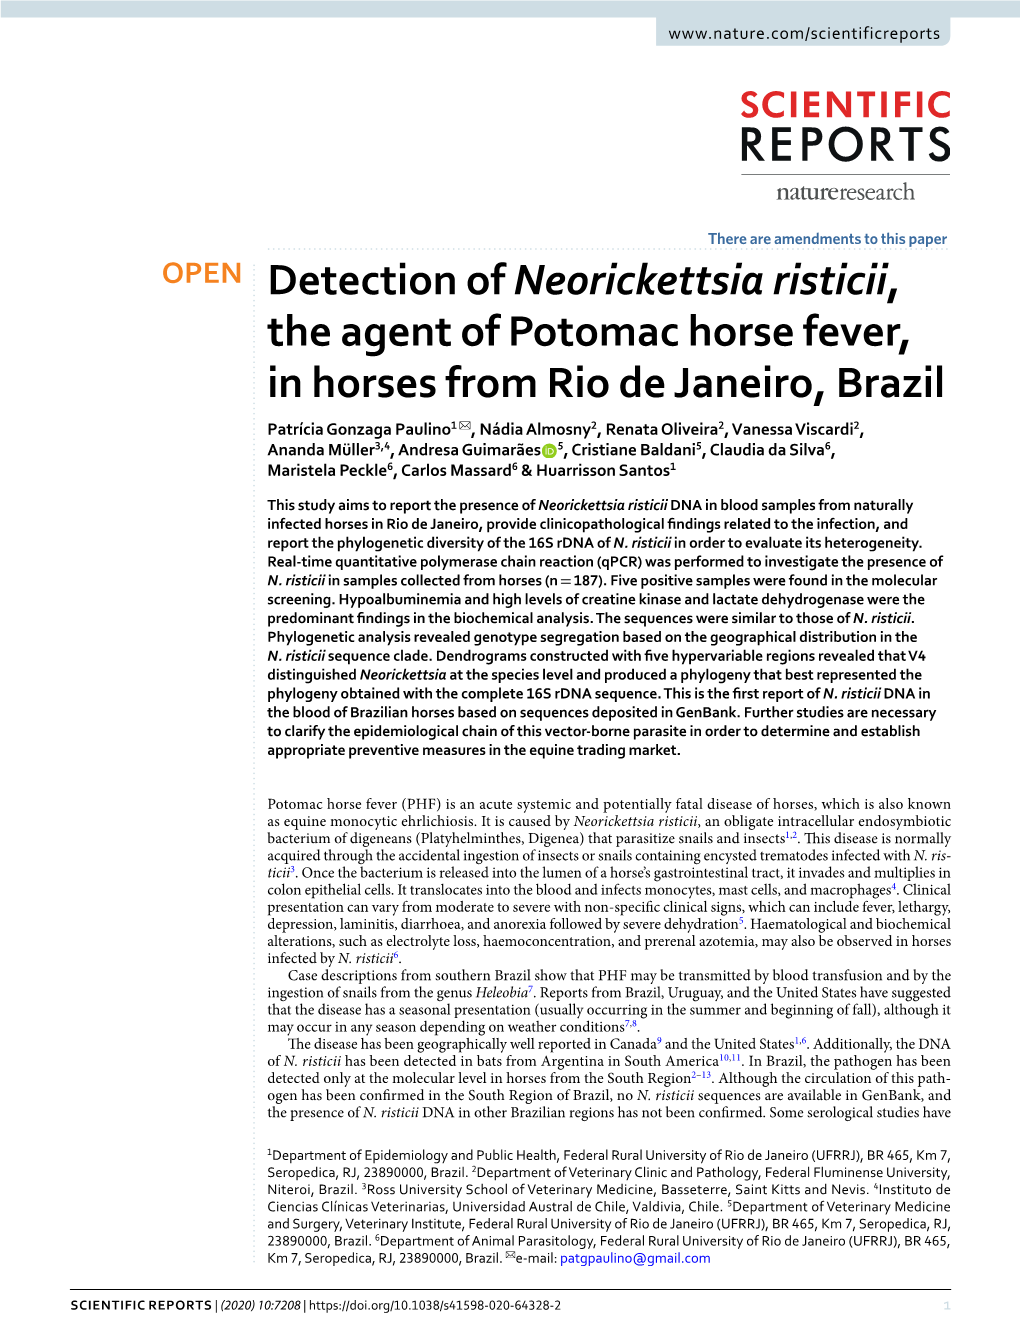 Detection of Neorickettsia Risticii, the Agent of Potomac Horse Fever, In